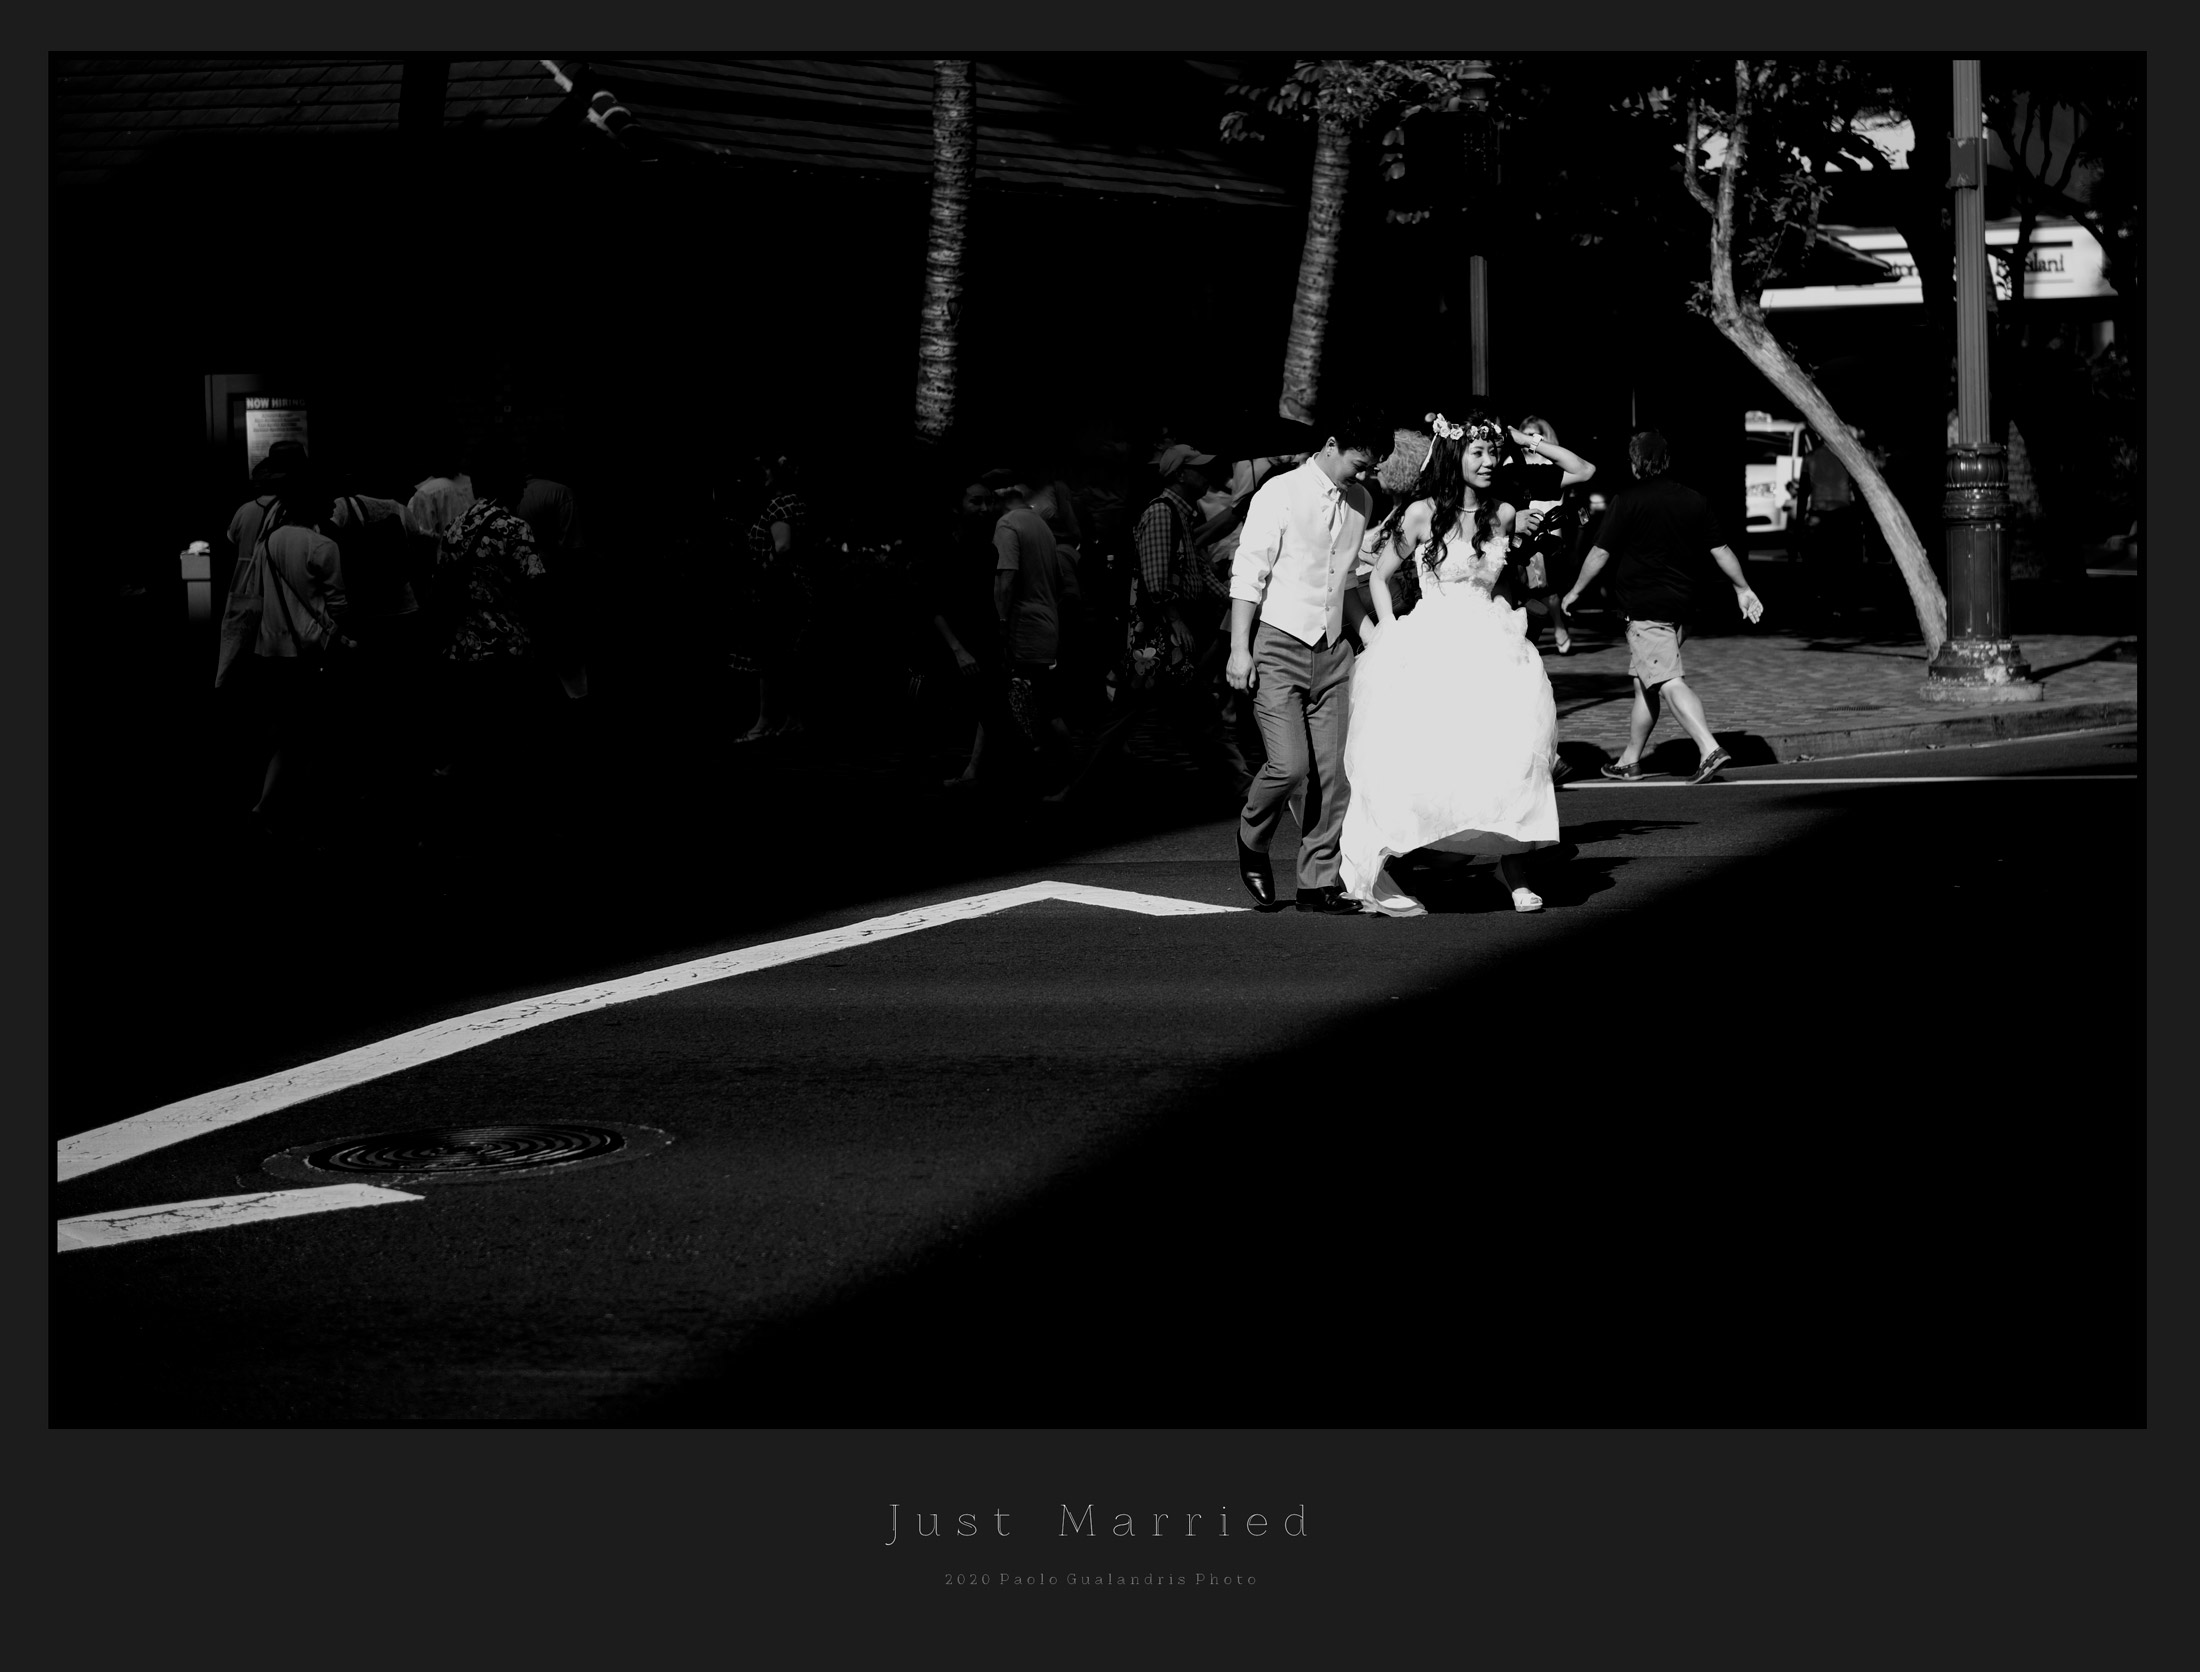 Just Married, New Year...